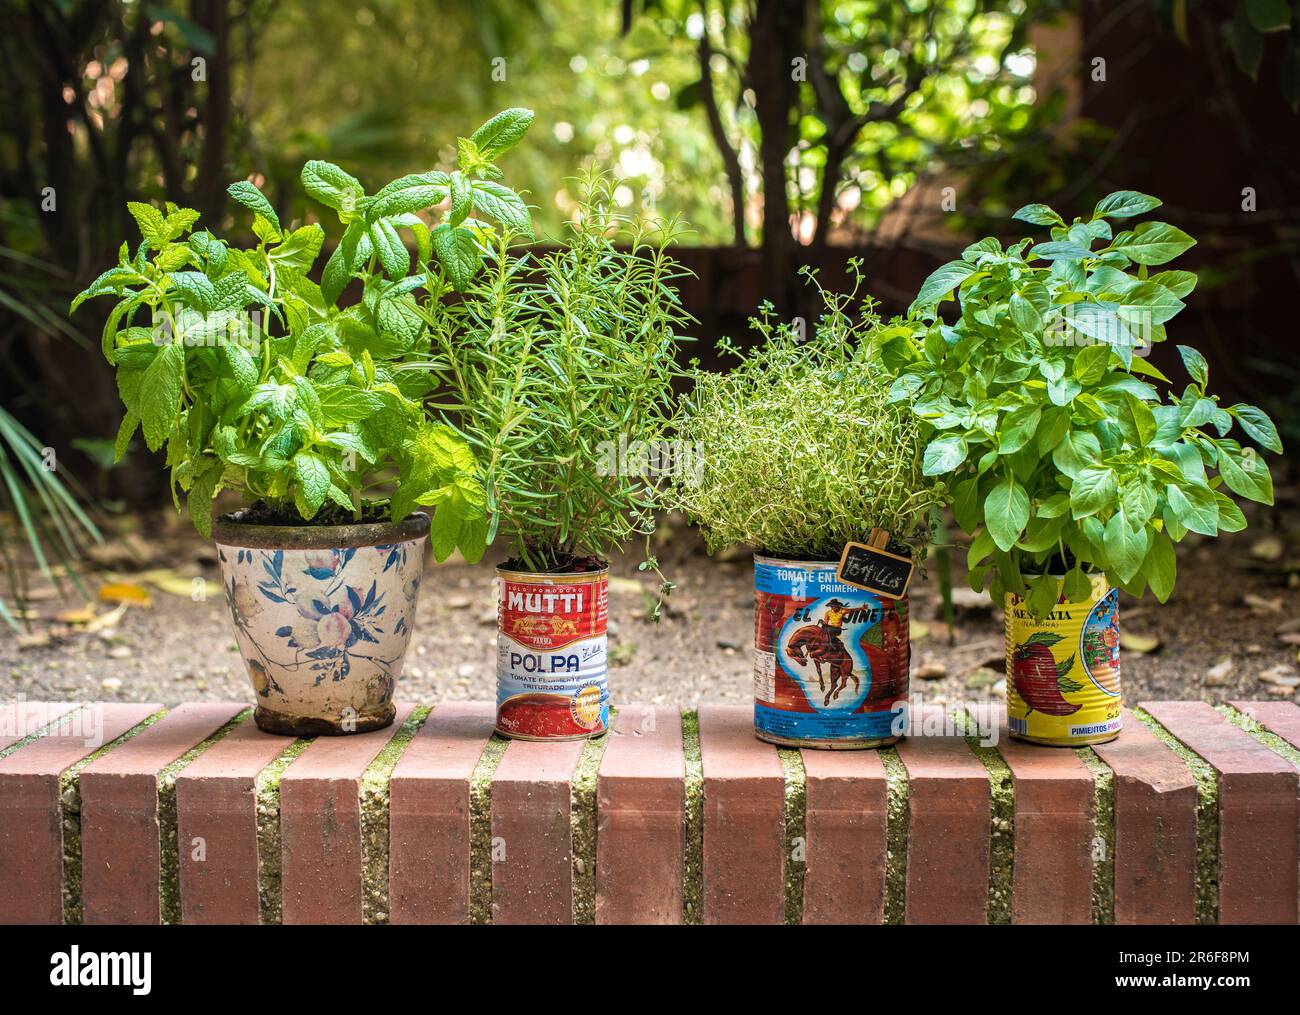 Aromatic herb plants, Spearmint, Rosemary, Lemon thyme and Lemon basil, planted in tin cans. Stock Photo